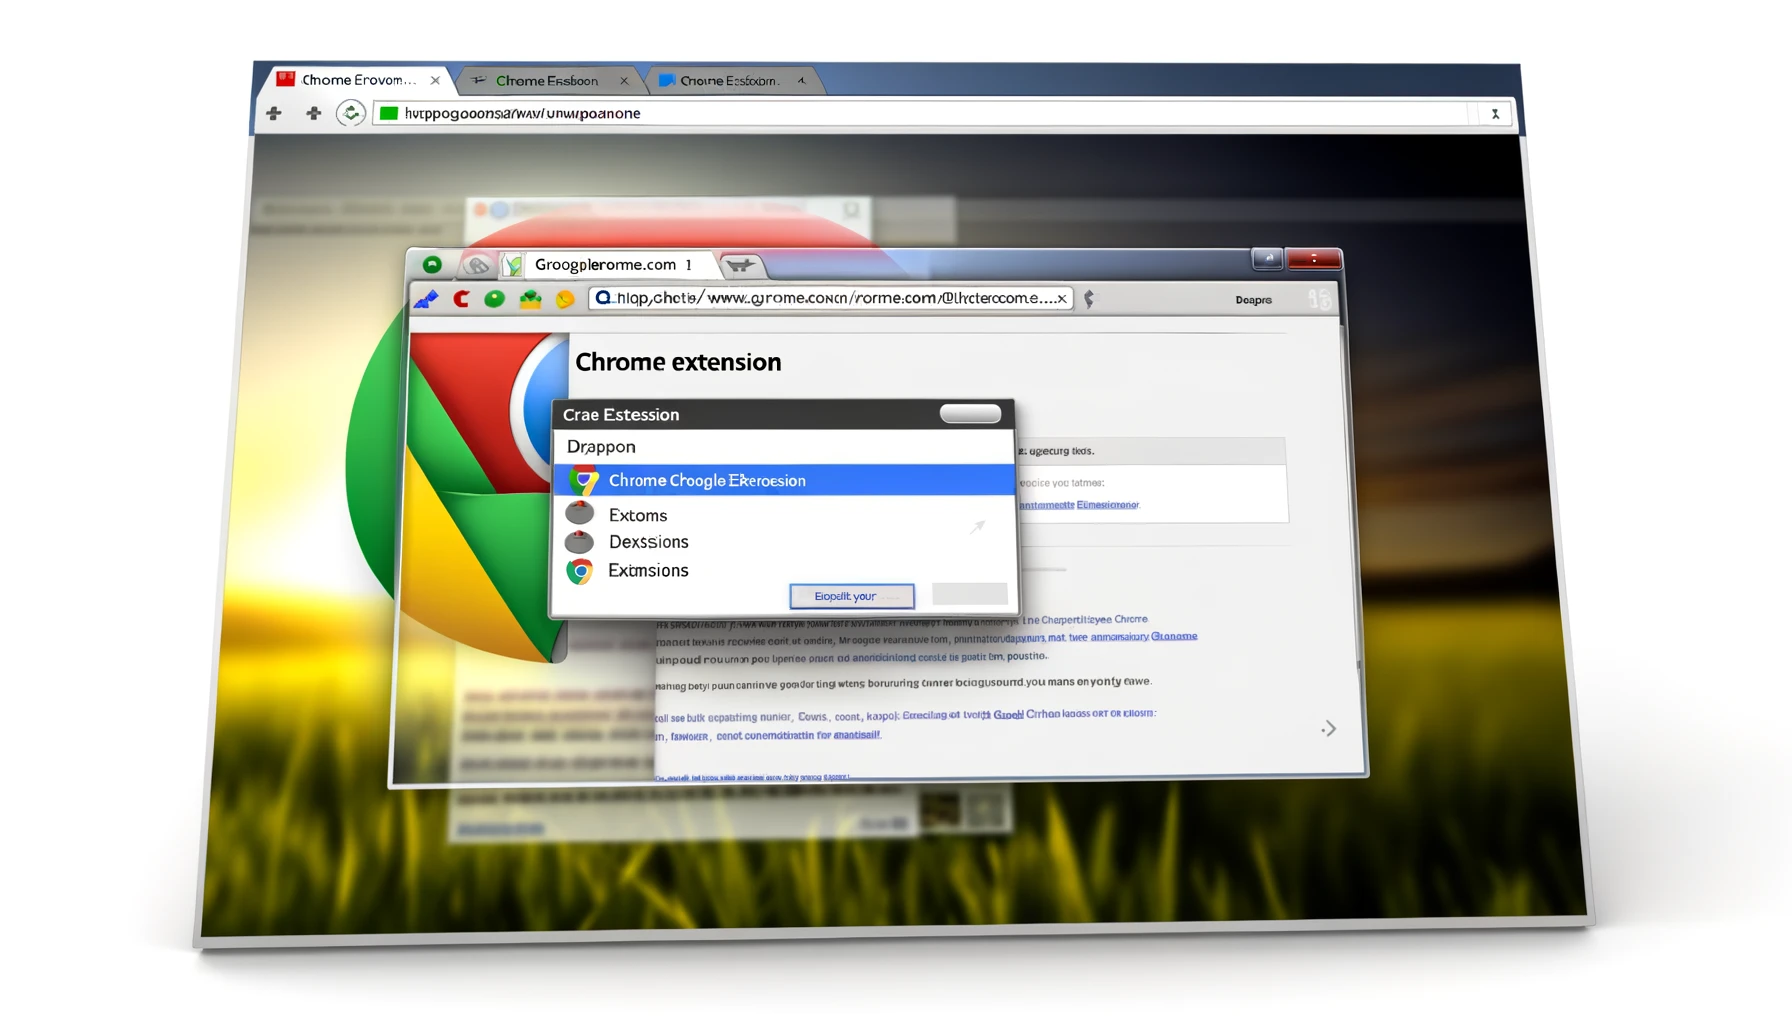 The images above depict a detailed and realistic representation of a Google Chrome browser window, highlighting the interface of a Chrome extension.